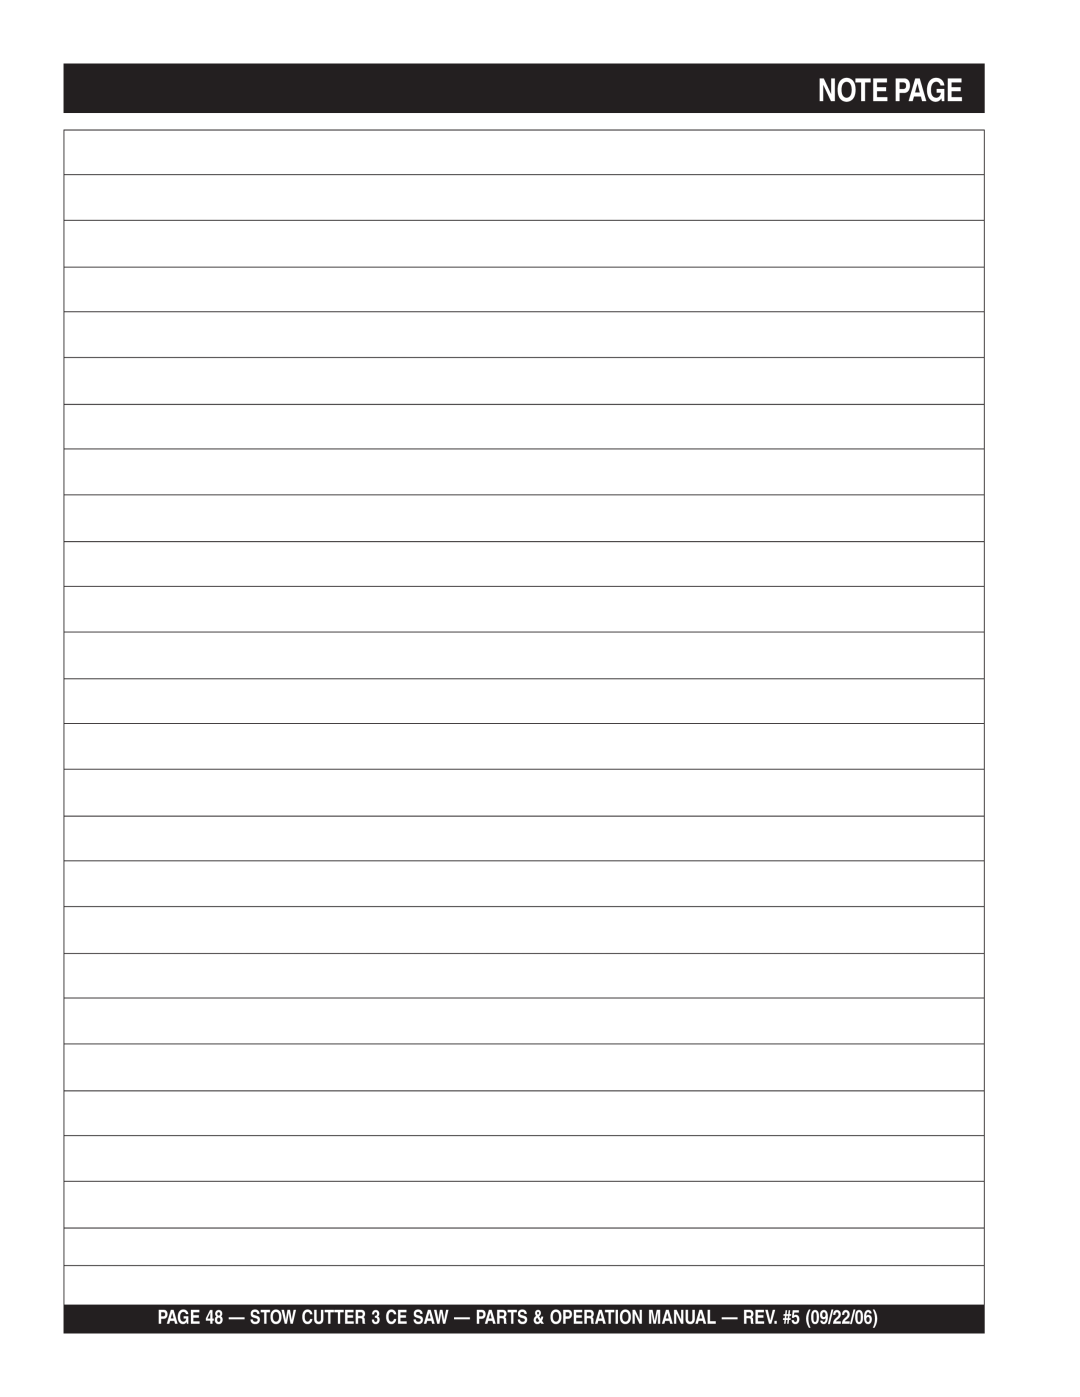 Stow 20HP, 13HP manual Note Page 